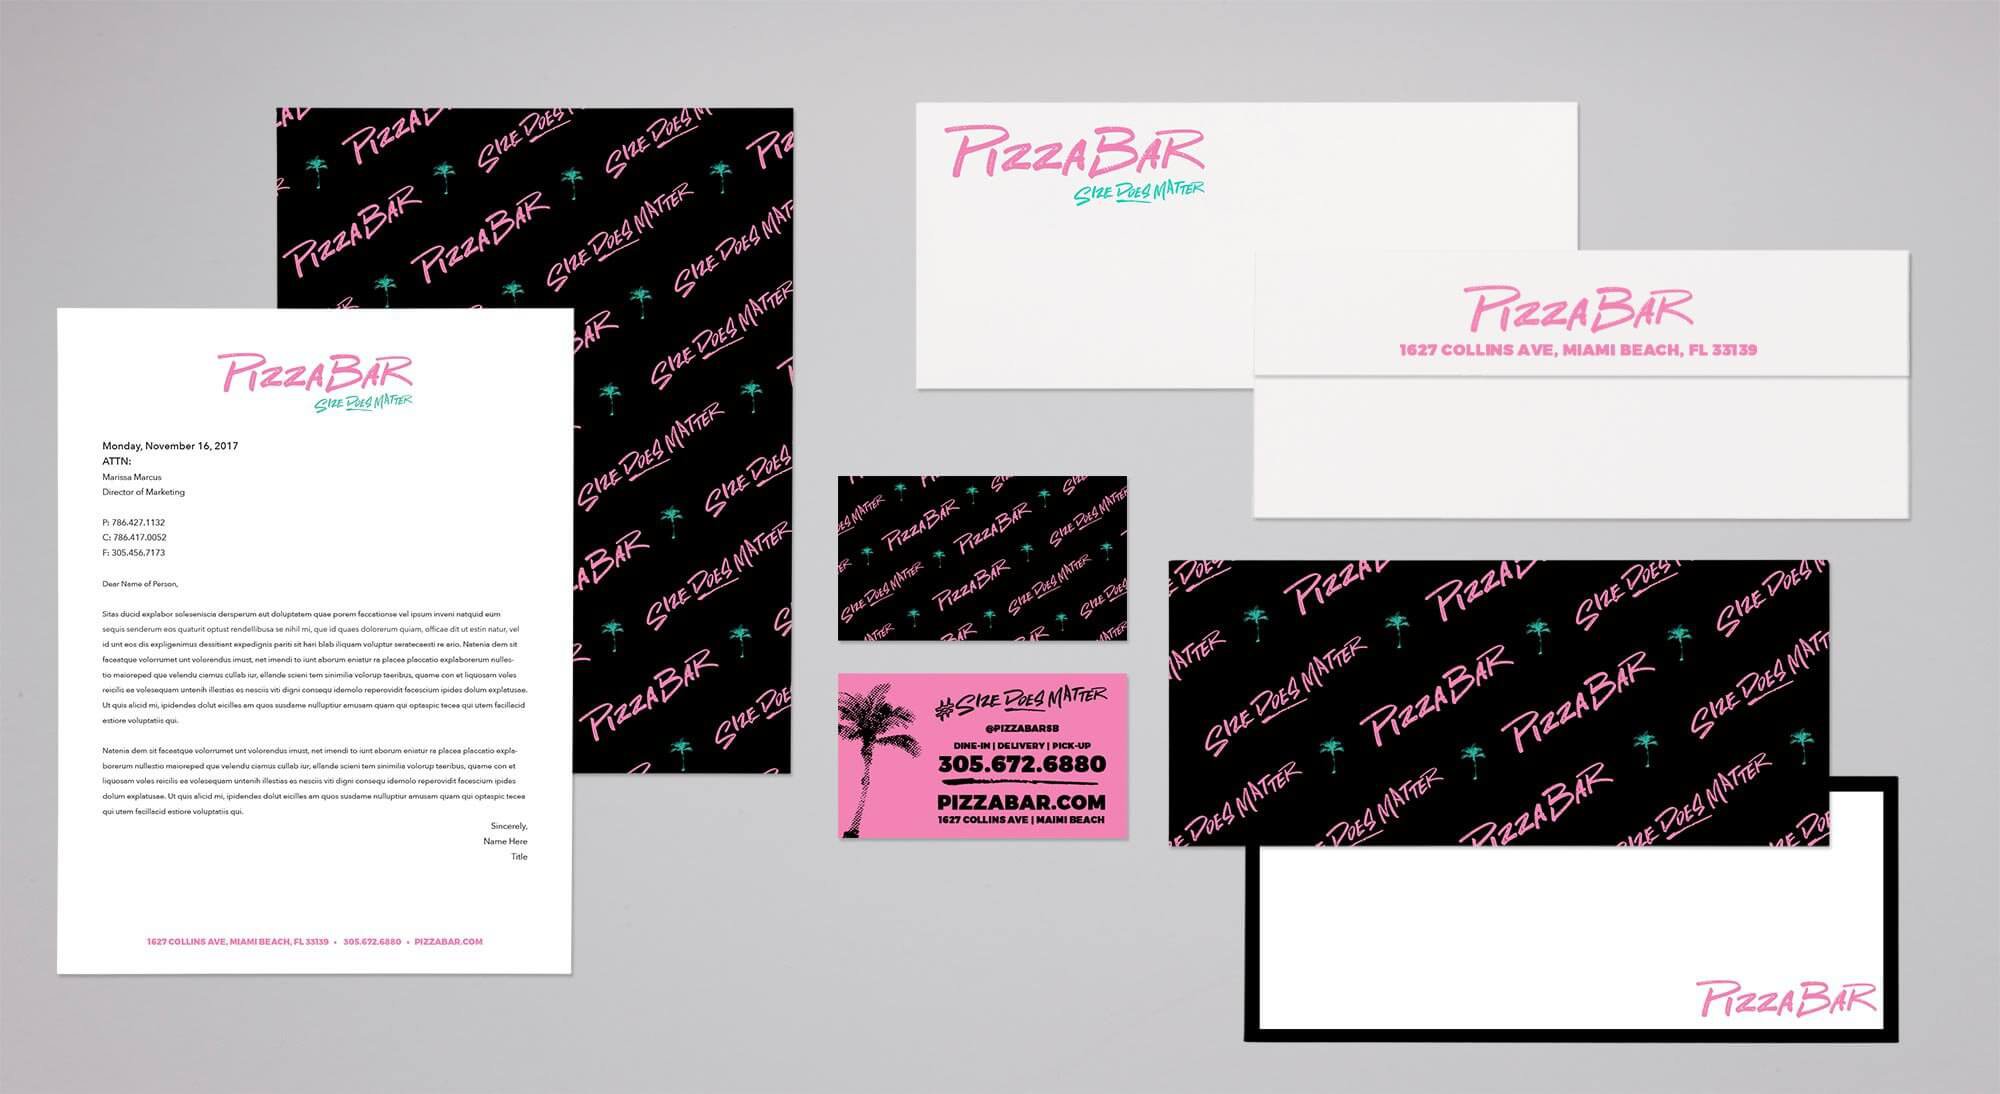 Pizza Bar branded collateral design